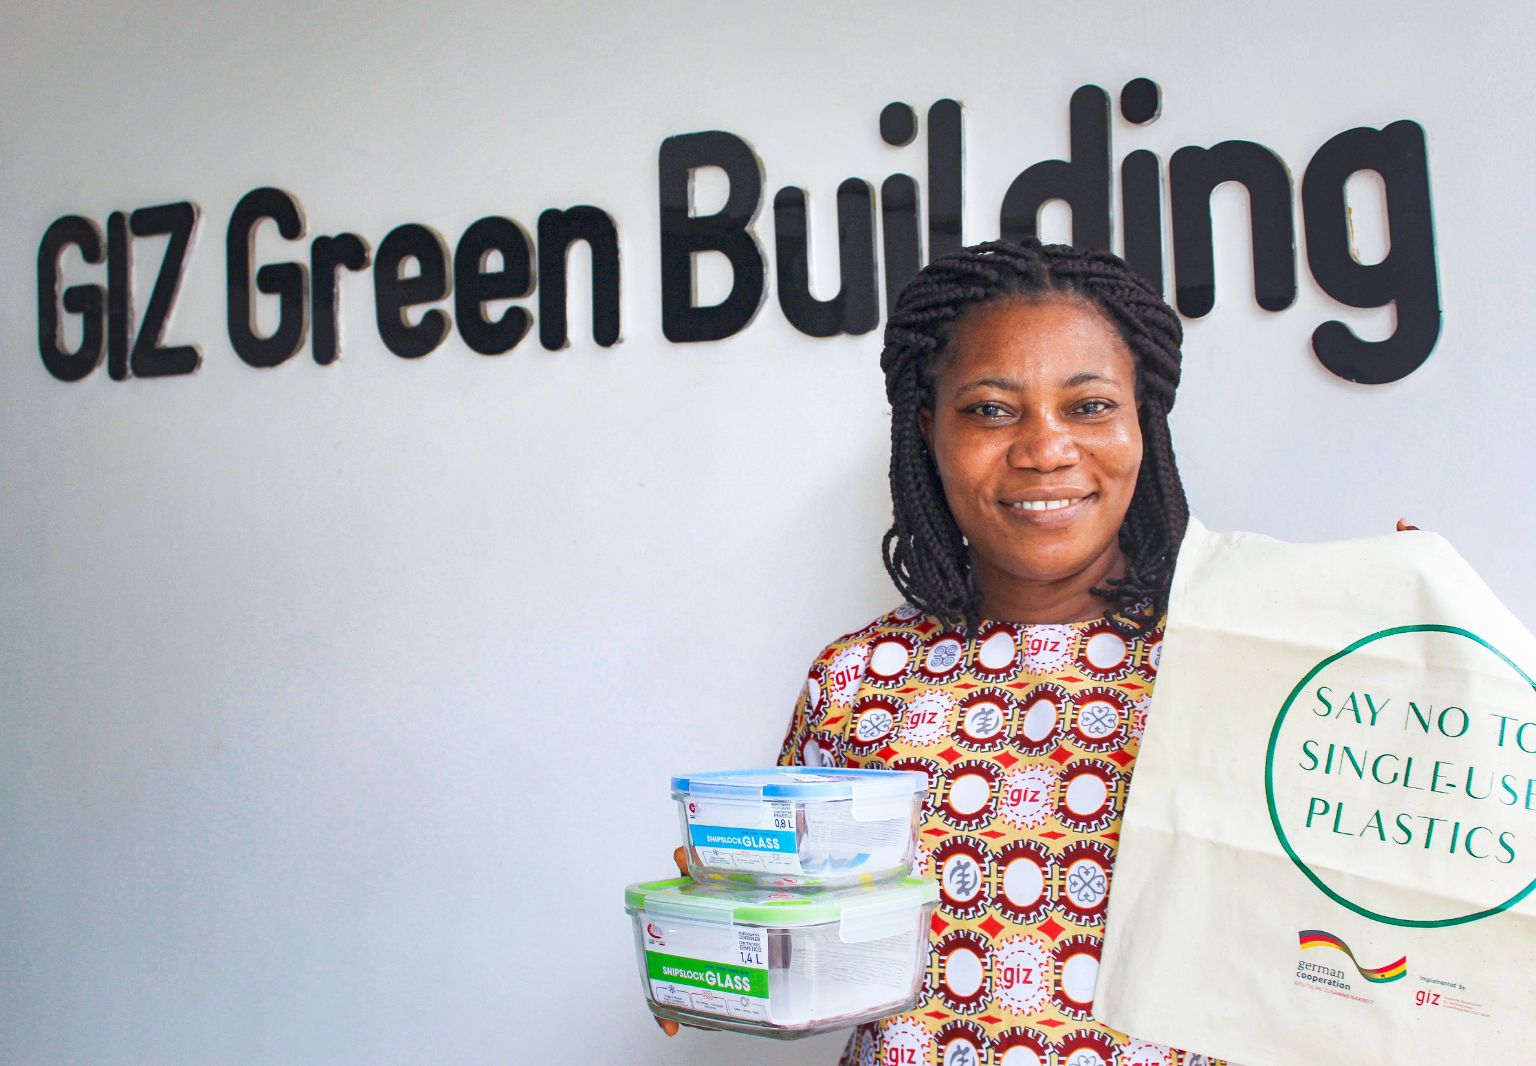 Photo: A woman standing in front of a wall with a sign that reads: ‘GIZ Green Building’. She is holding two glass containers with lids and a fabric bag printed with the words: ‘Say no to single-use plastics’.